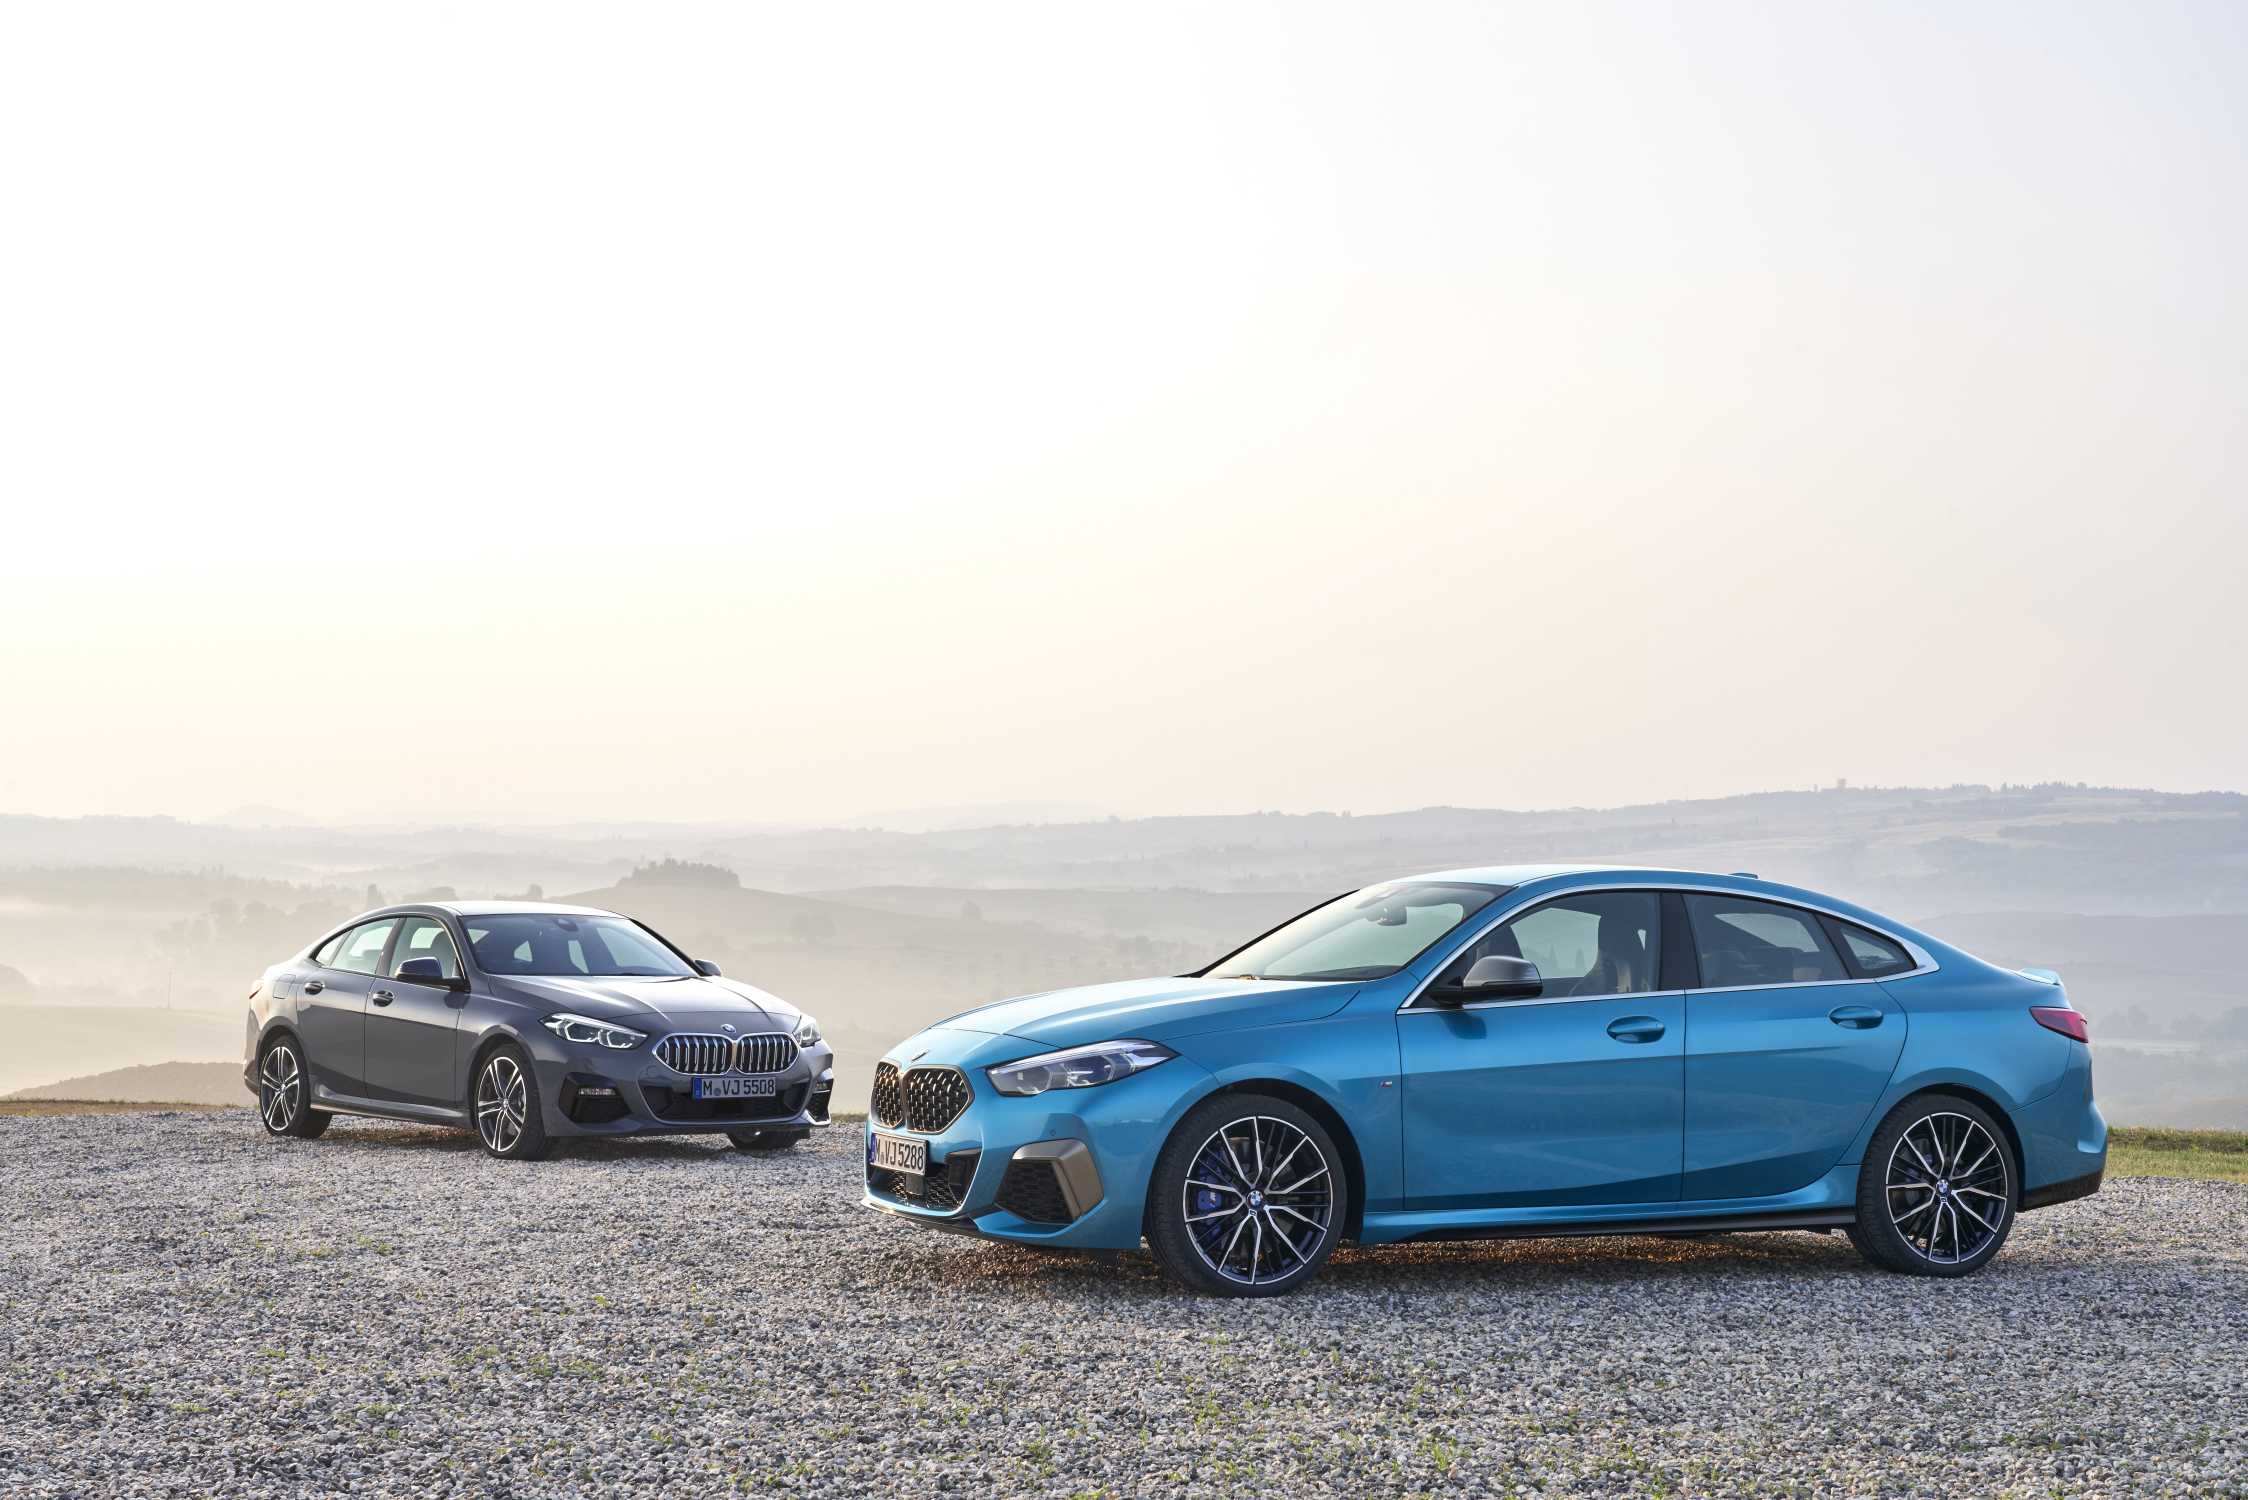 The all-new BMW 2 Series Gran Coupe (10/2019).